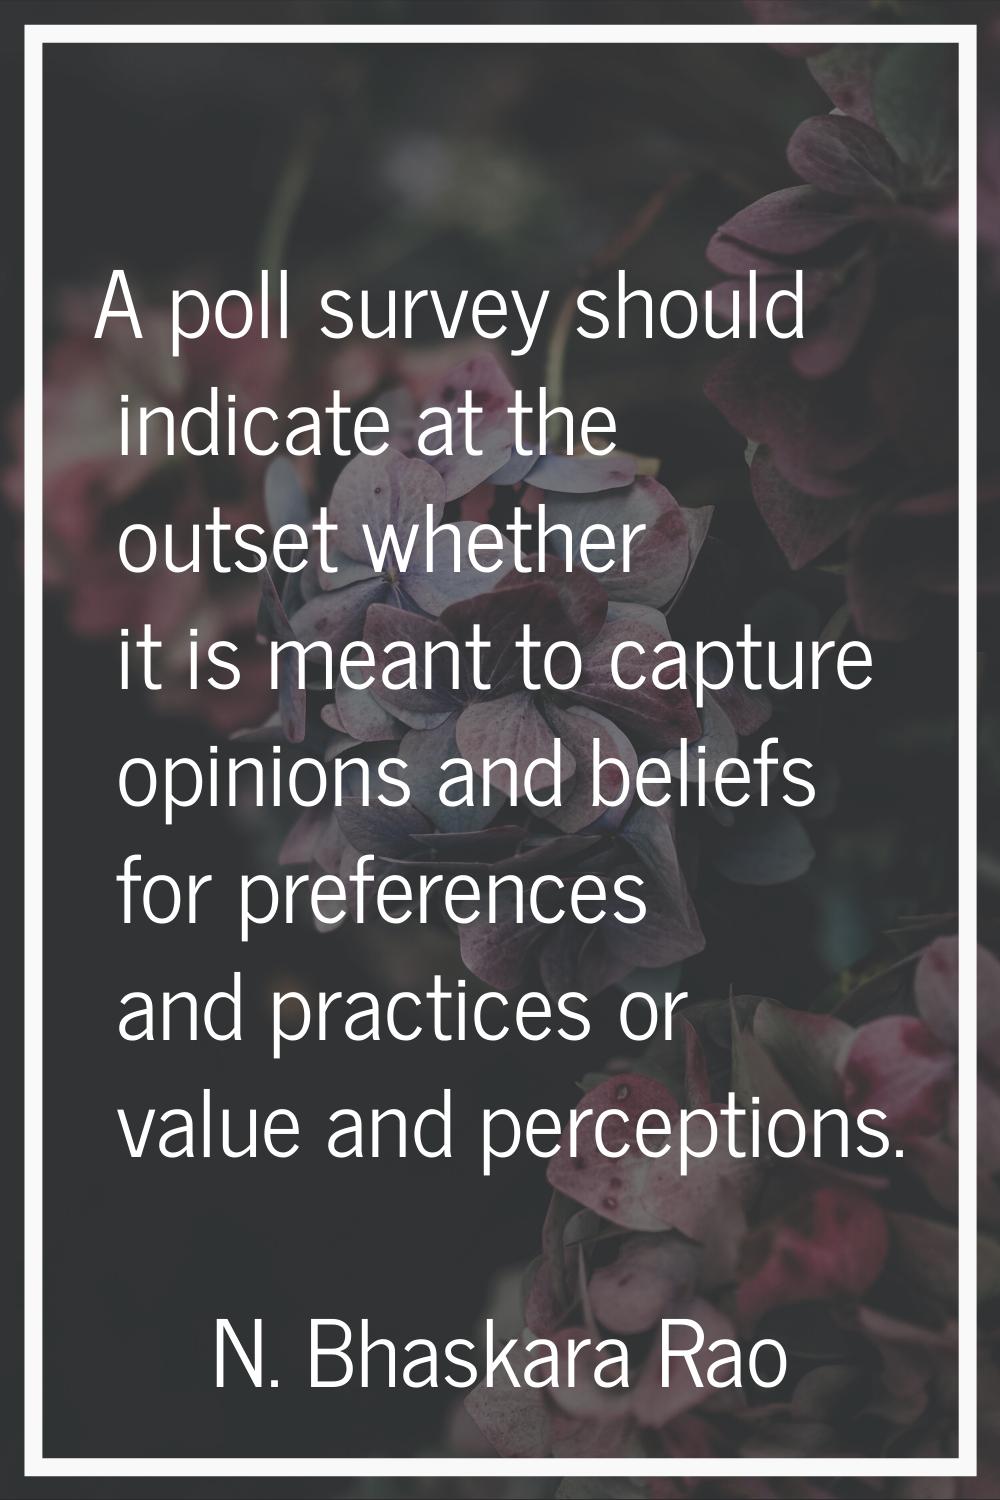 A poll survey should indicate at the outset whether it is meant to capture opinions and beliefs for